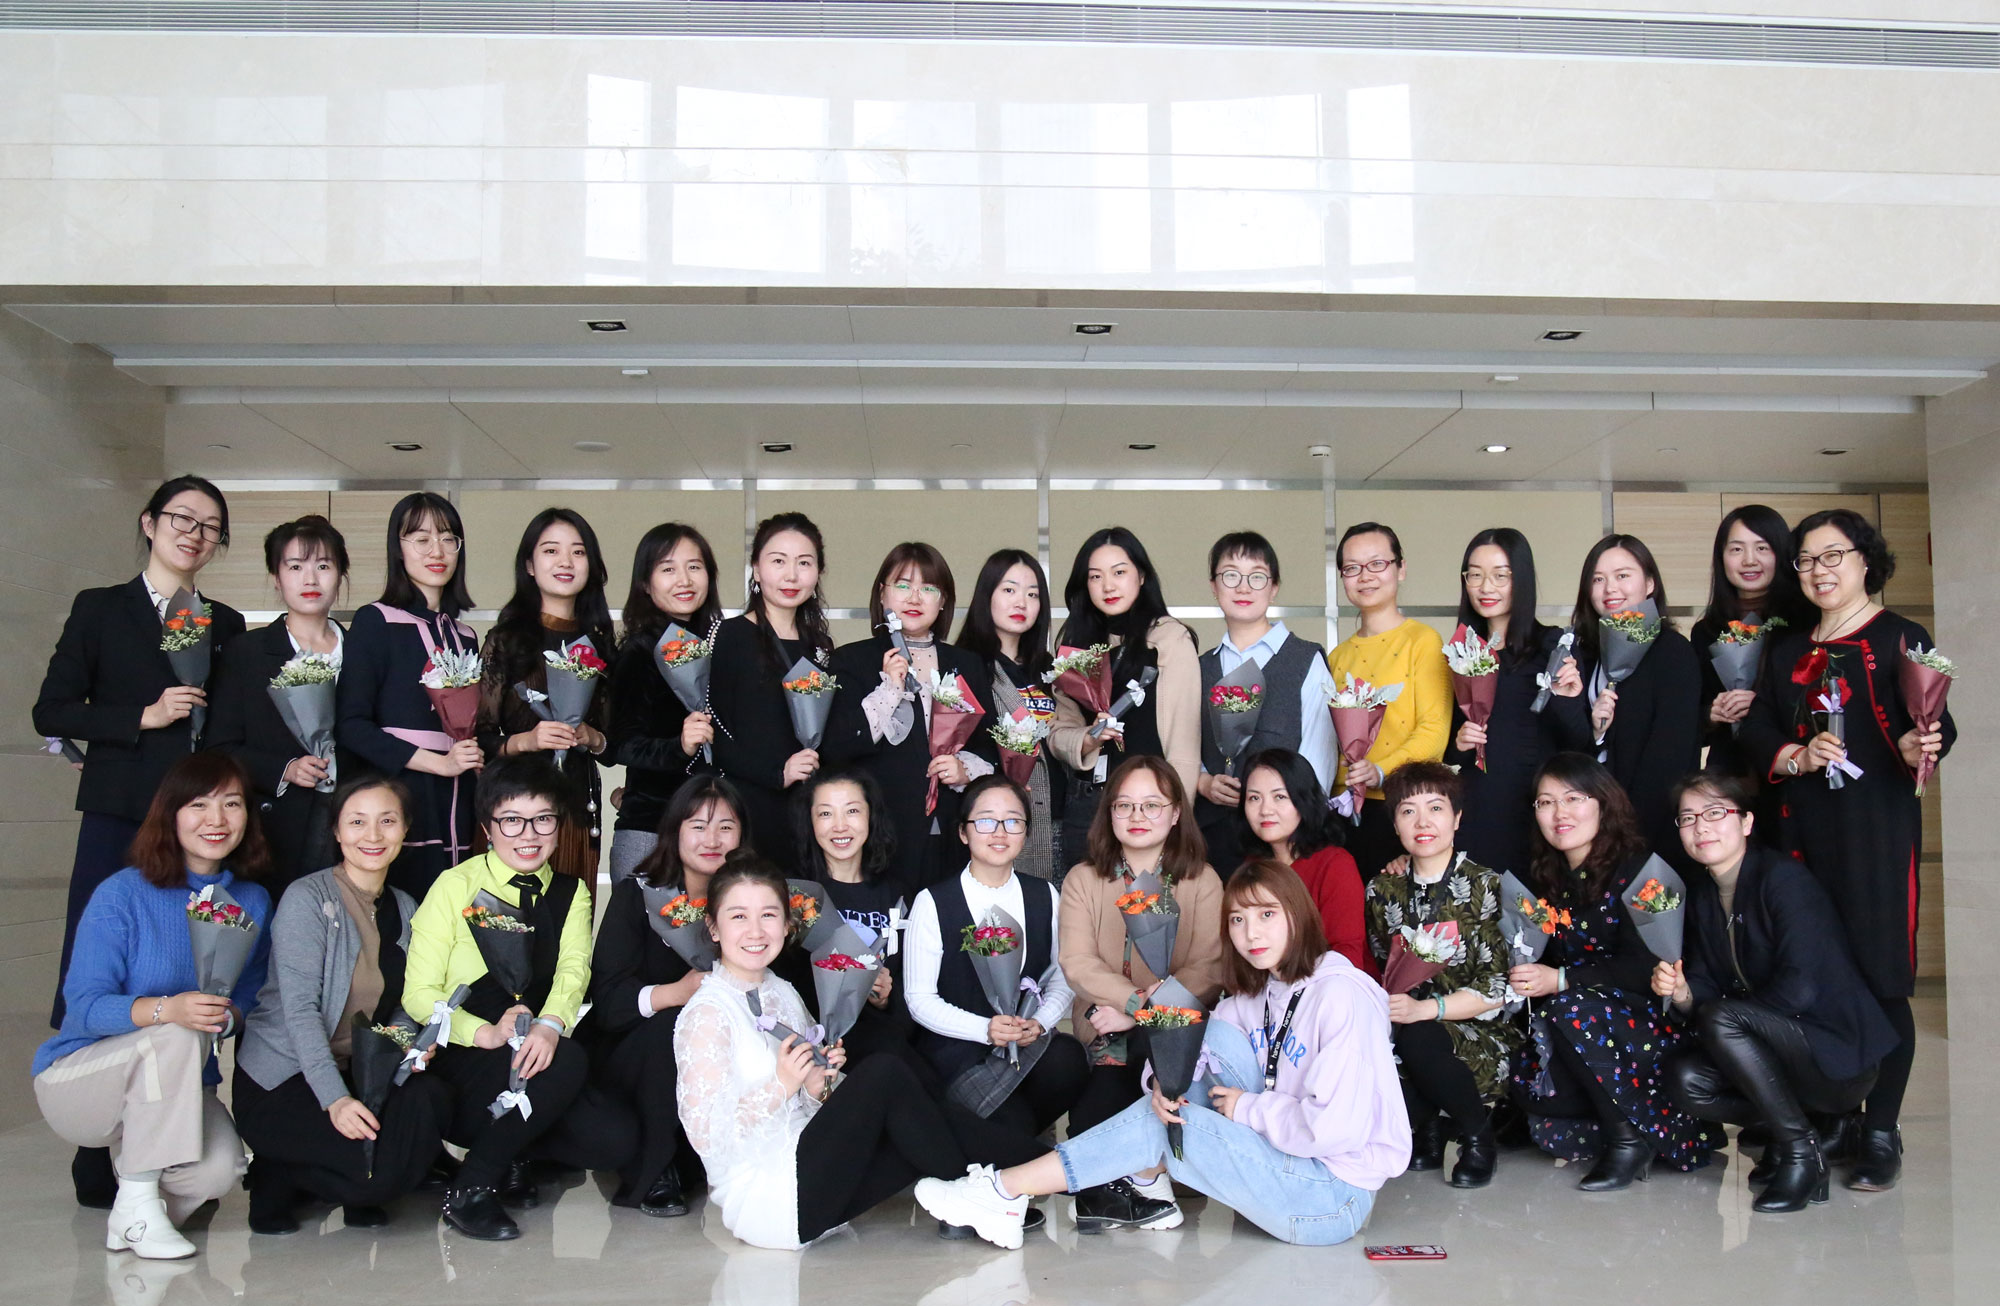 Hanas Gas Group LNG Business Unit organized the “March Women’s Day” activity